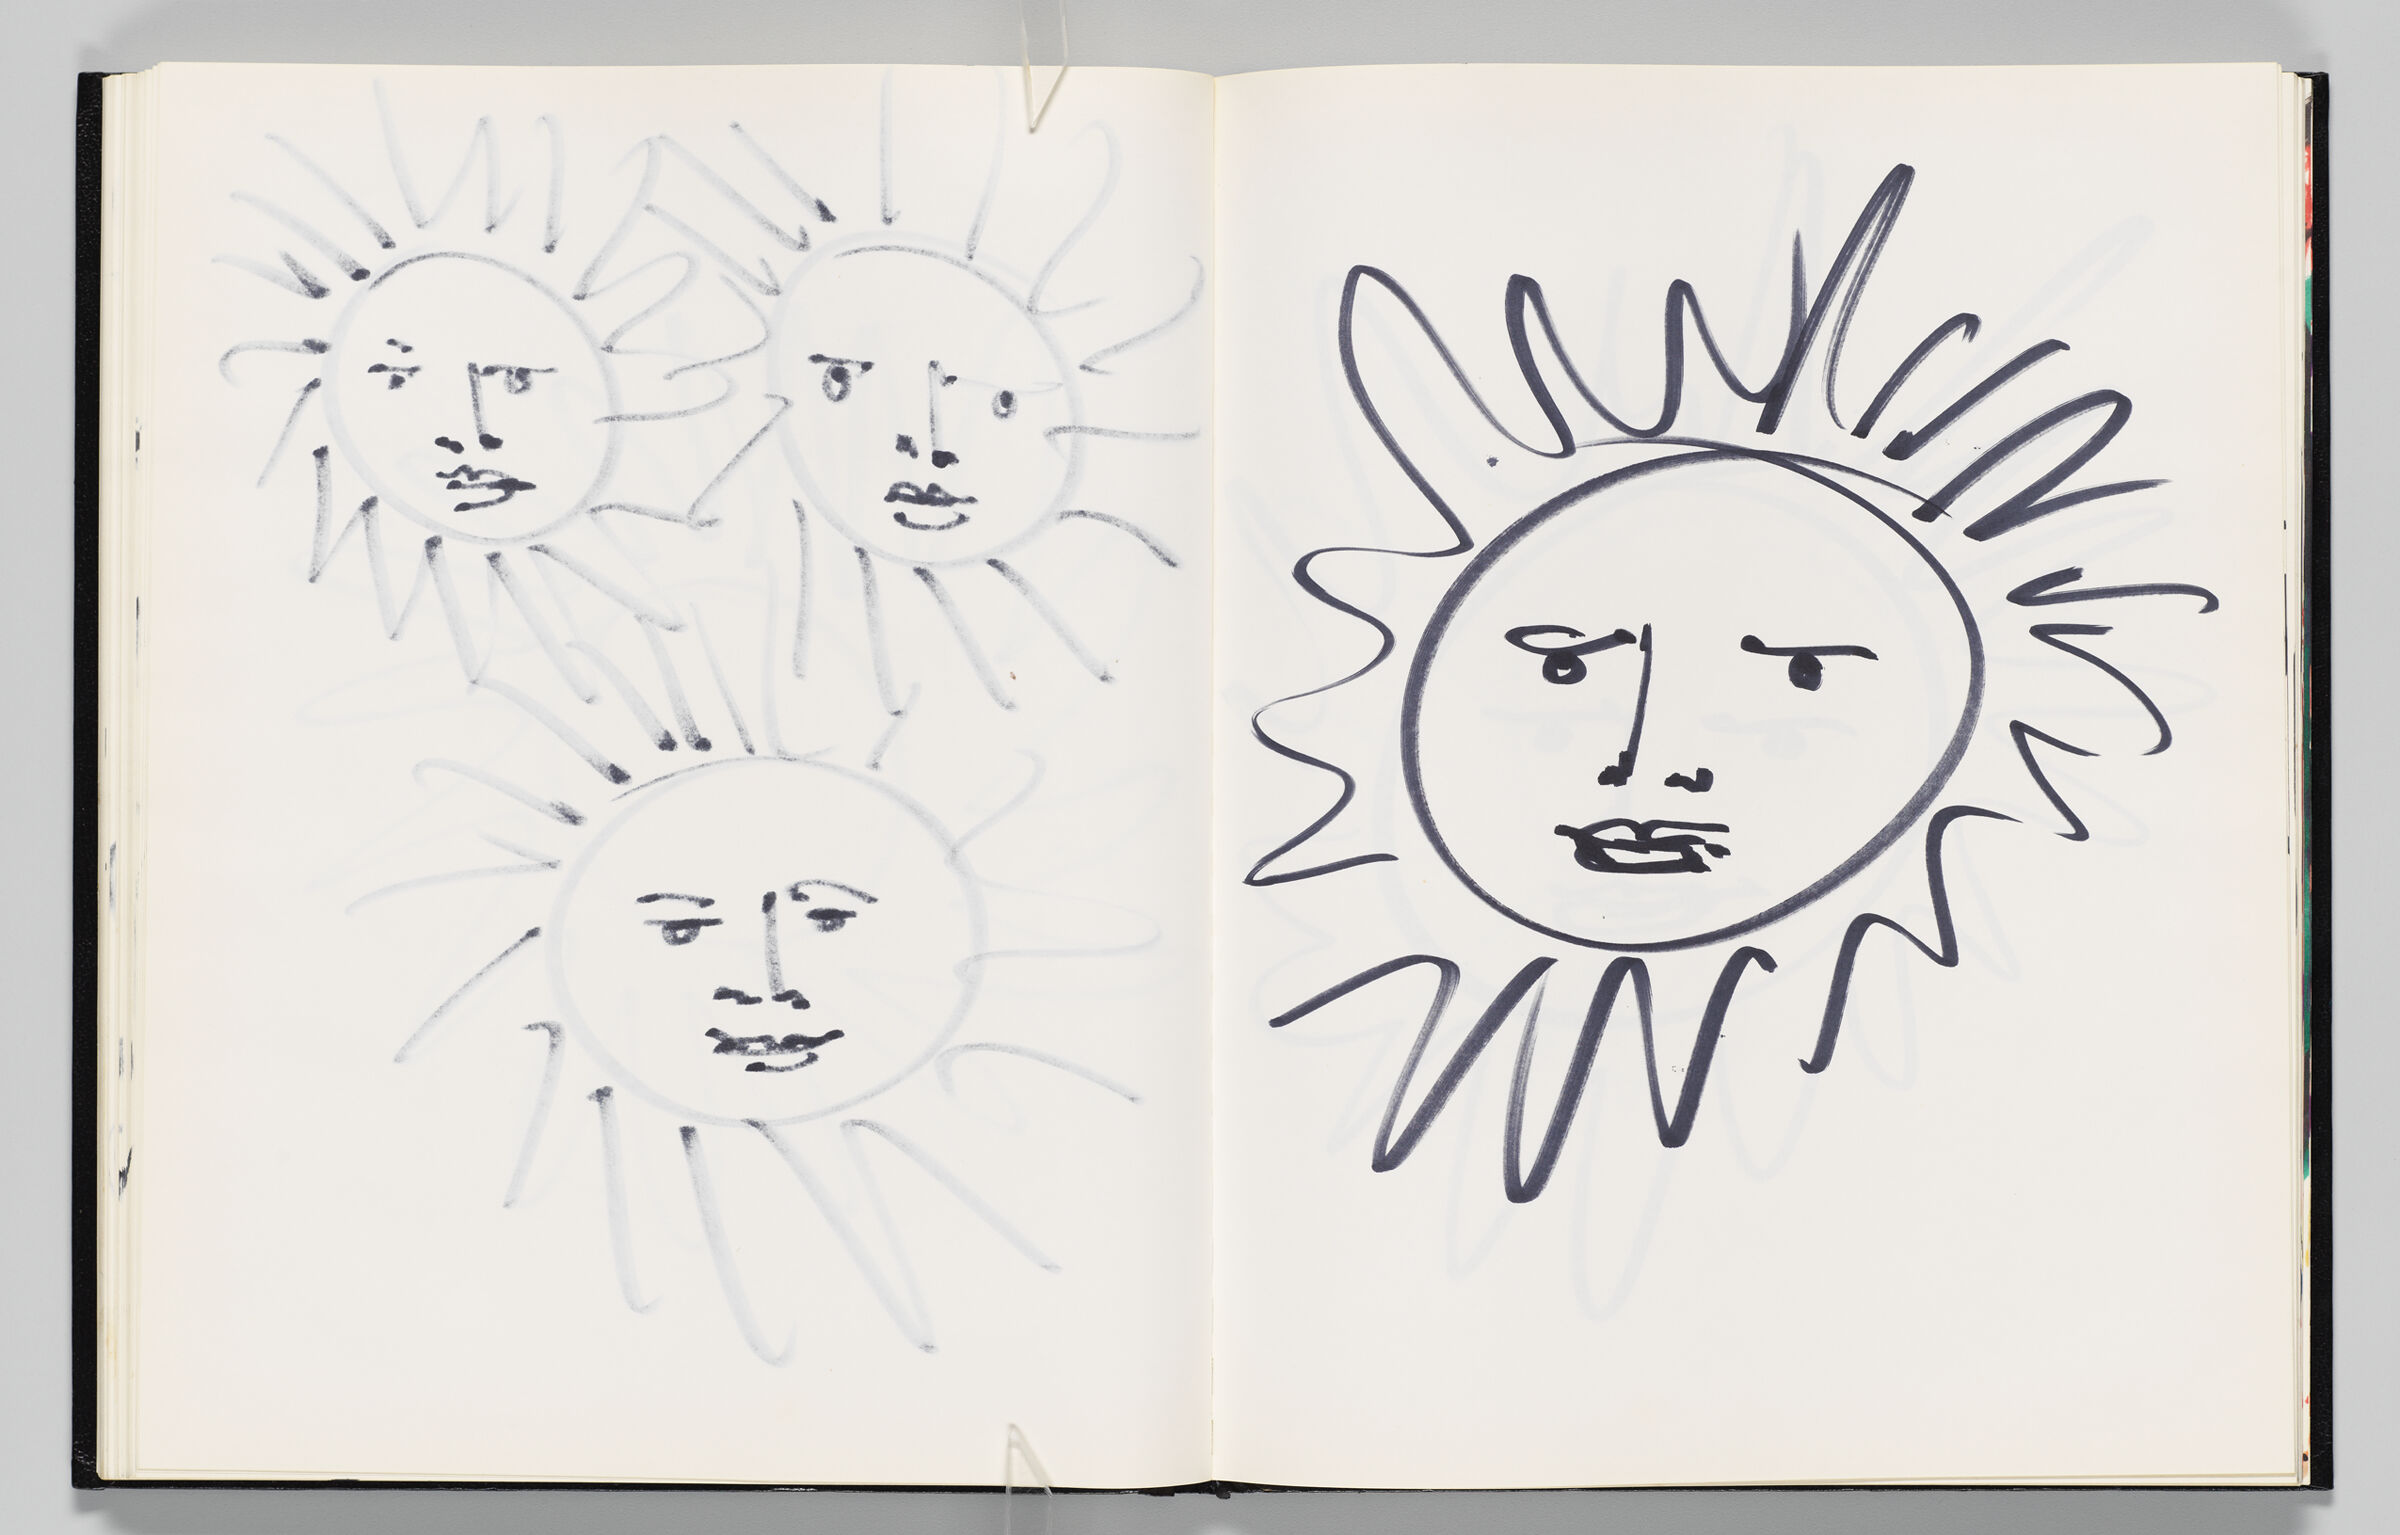 Untitled (Bleed-Through Of Previous Page, Left Page); Untitled (Suns/Phaeton, Right Page)